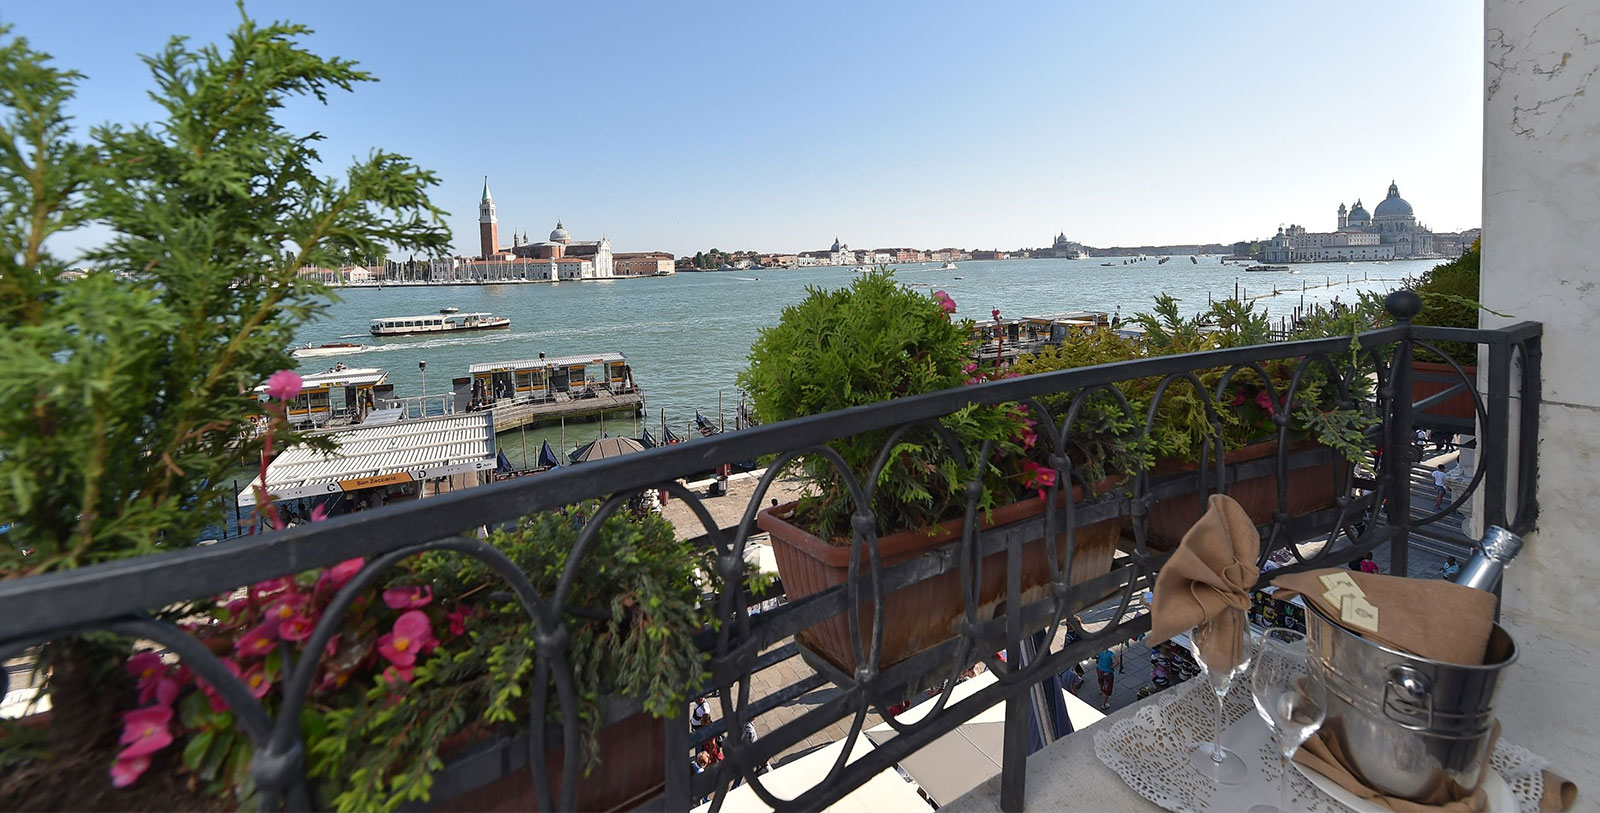 Image of view of Venetian Lagoon from guestroom at Hotel Savoia & Jolanda, 19th century, a member of Historic Hotels Worldwide in Venice, Italy